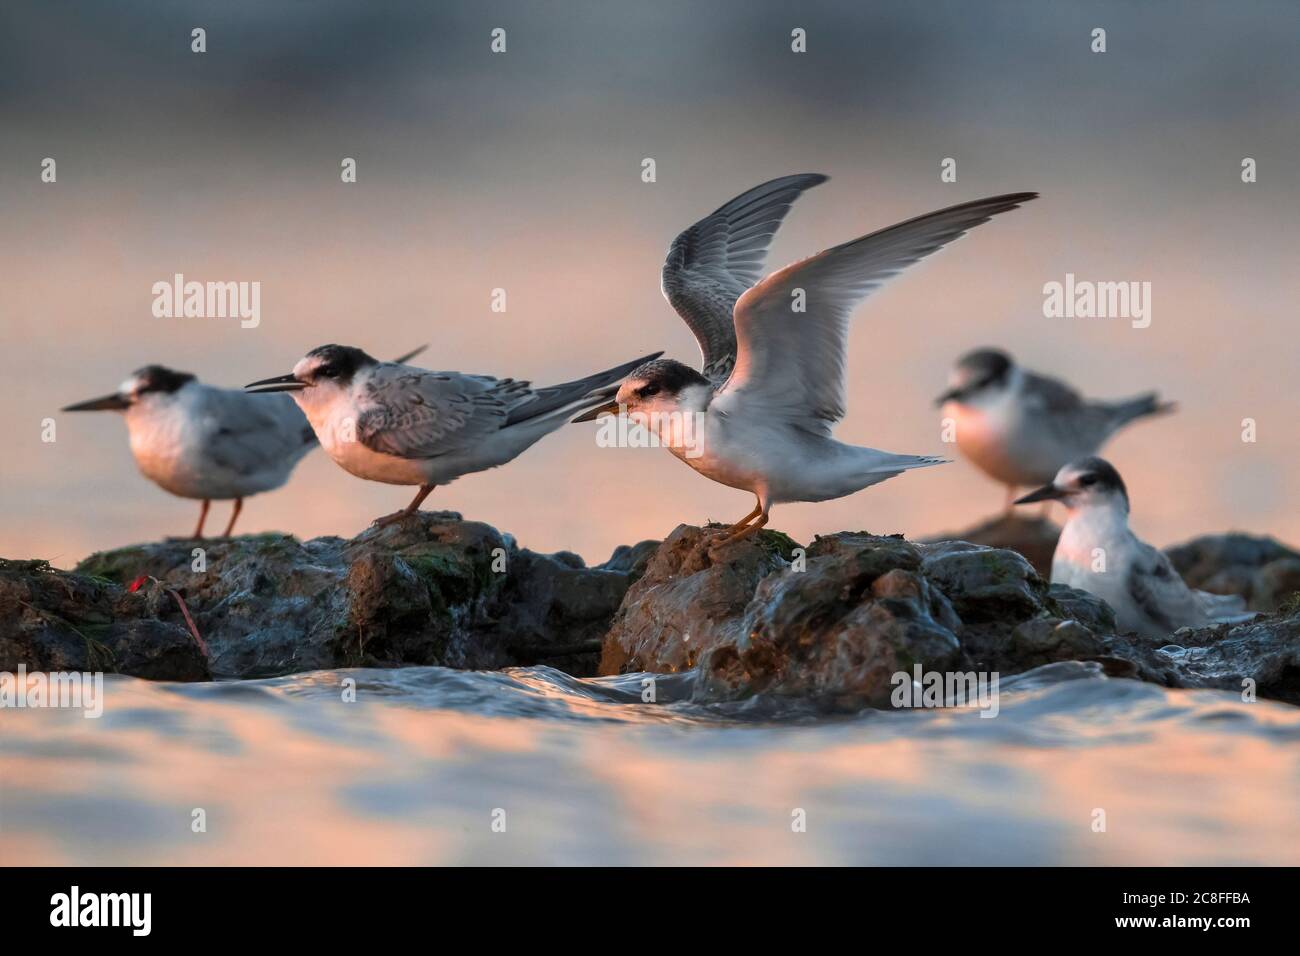 little tern (Sterna albifrons, Sternula albifrons), Immatures standing on a coastal rock in the Mediterranean sea in Italy, Italy, Leghorn Stock Photo